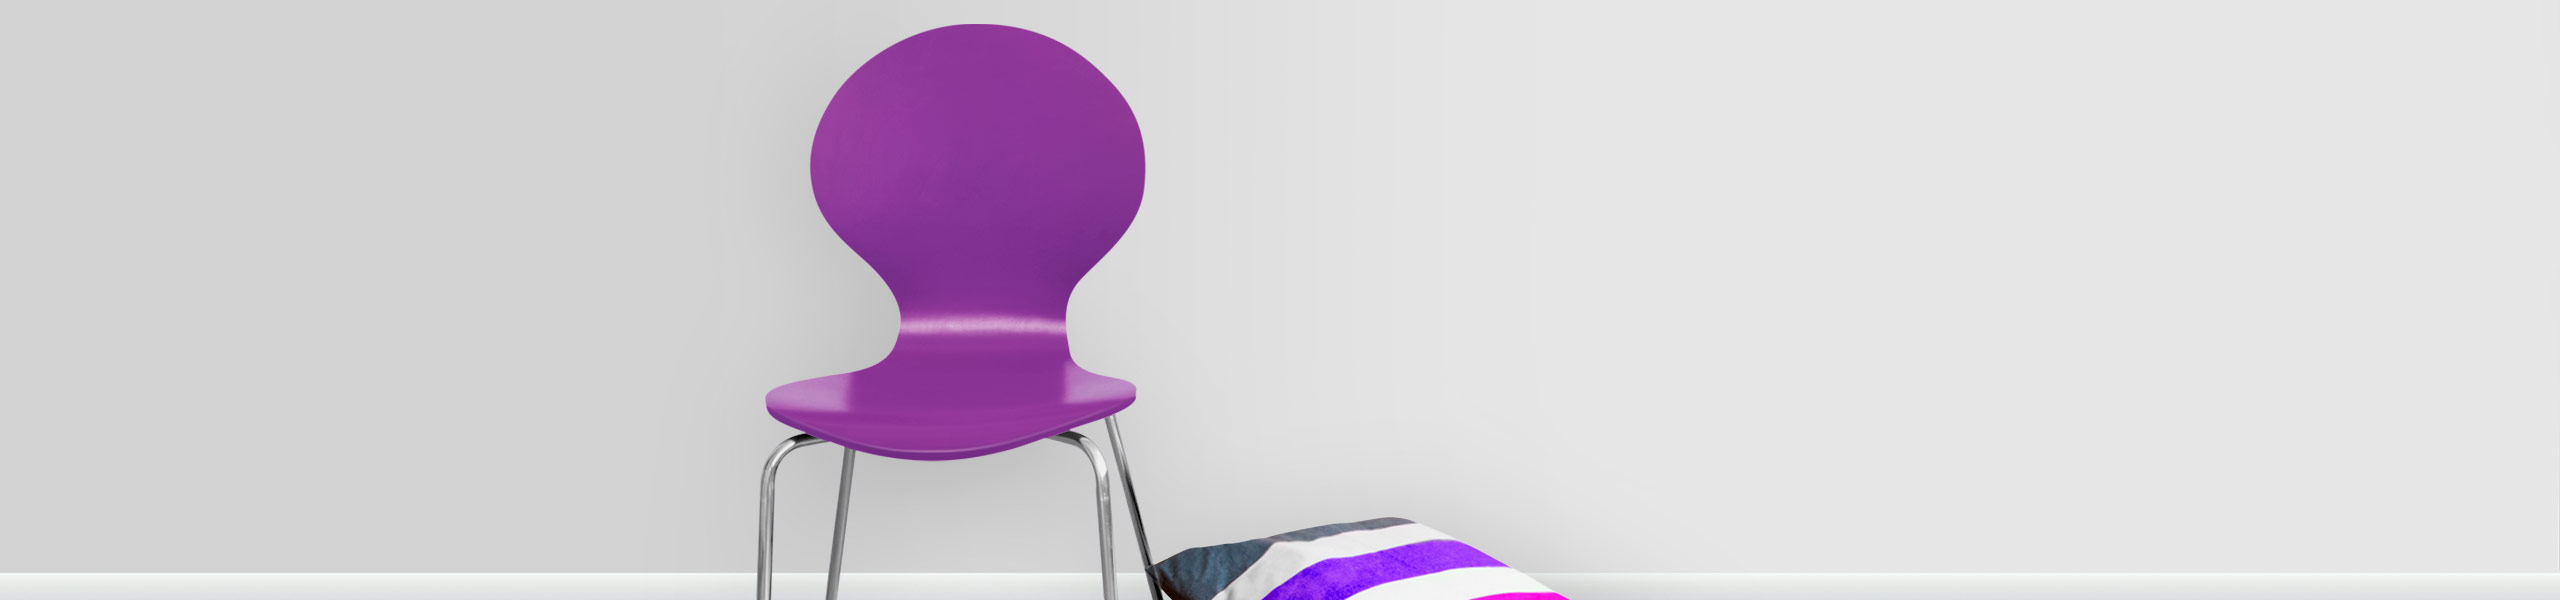 Candy Chair Purple Video Banner